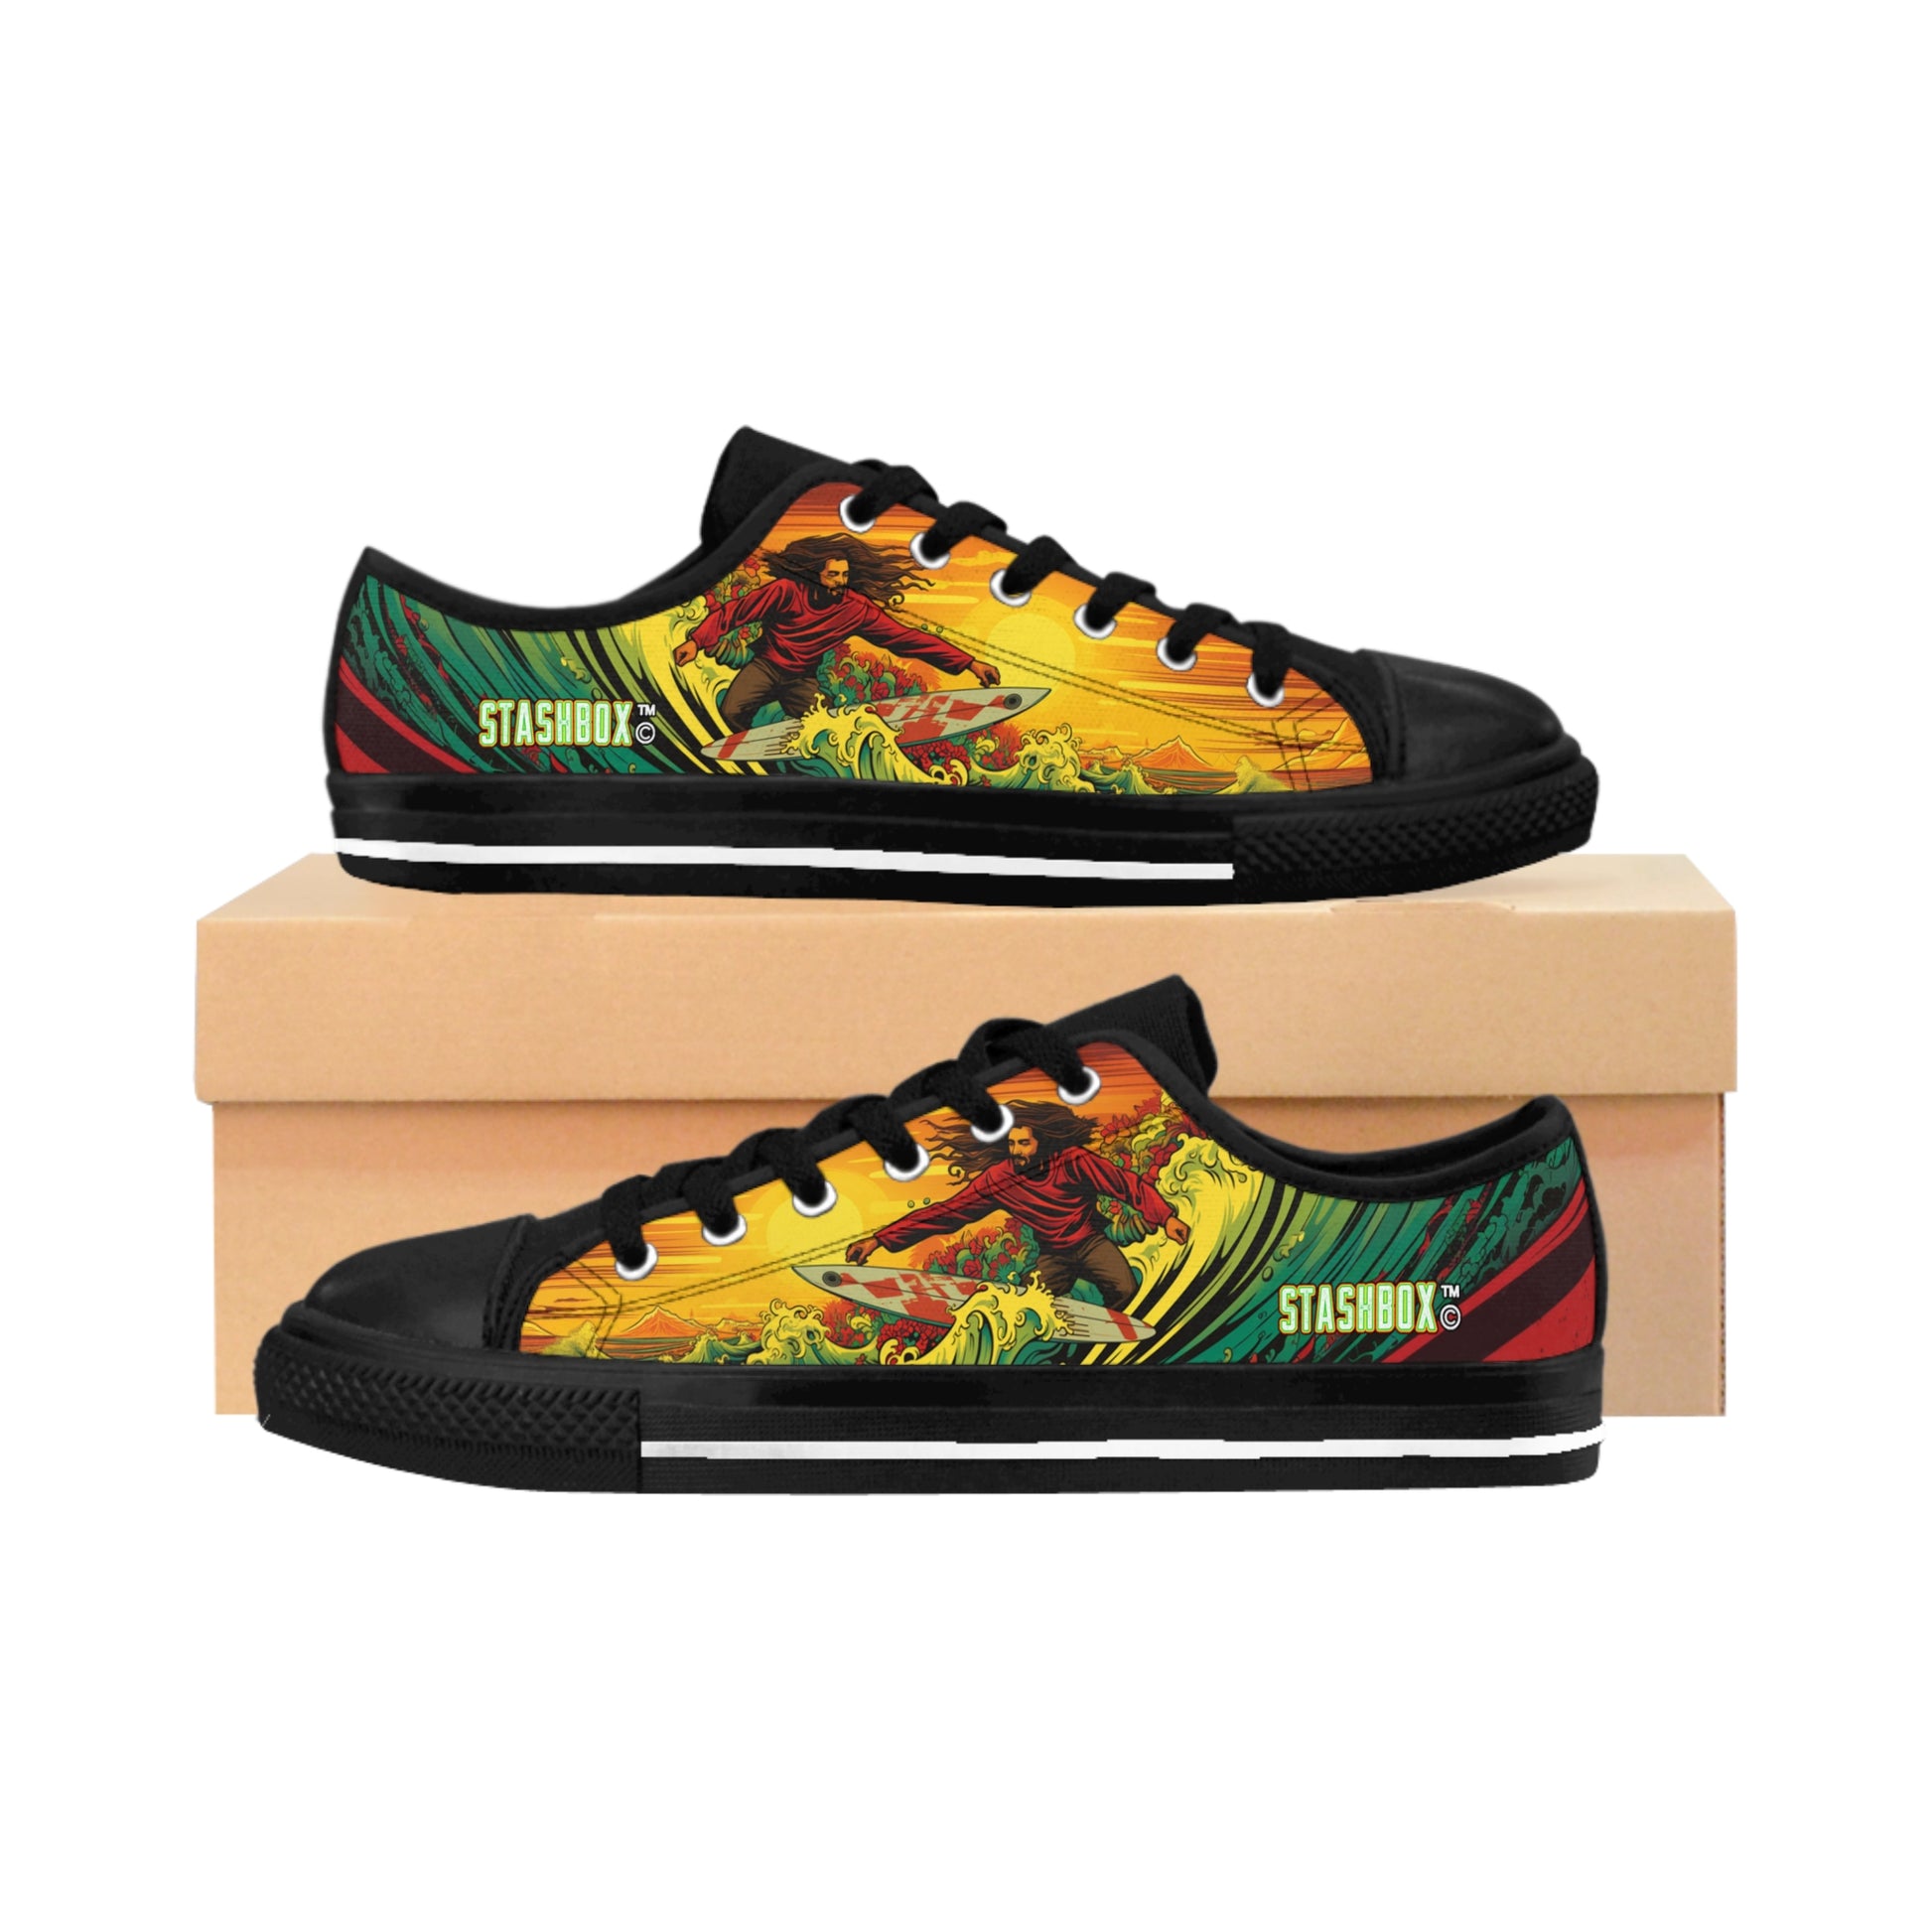 Ride the Rasta Wave with our Custom Men's Sneakers - Surfboard Design #005. Surf in style, exclusively at Stashbox.ai.